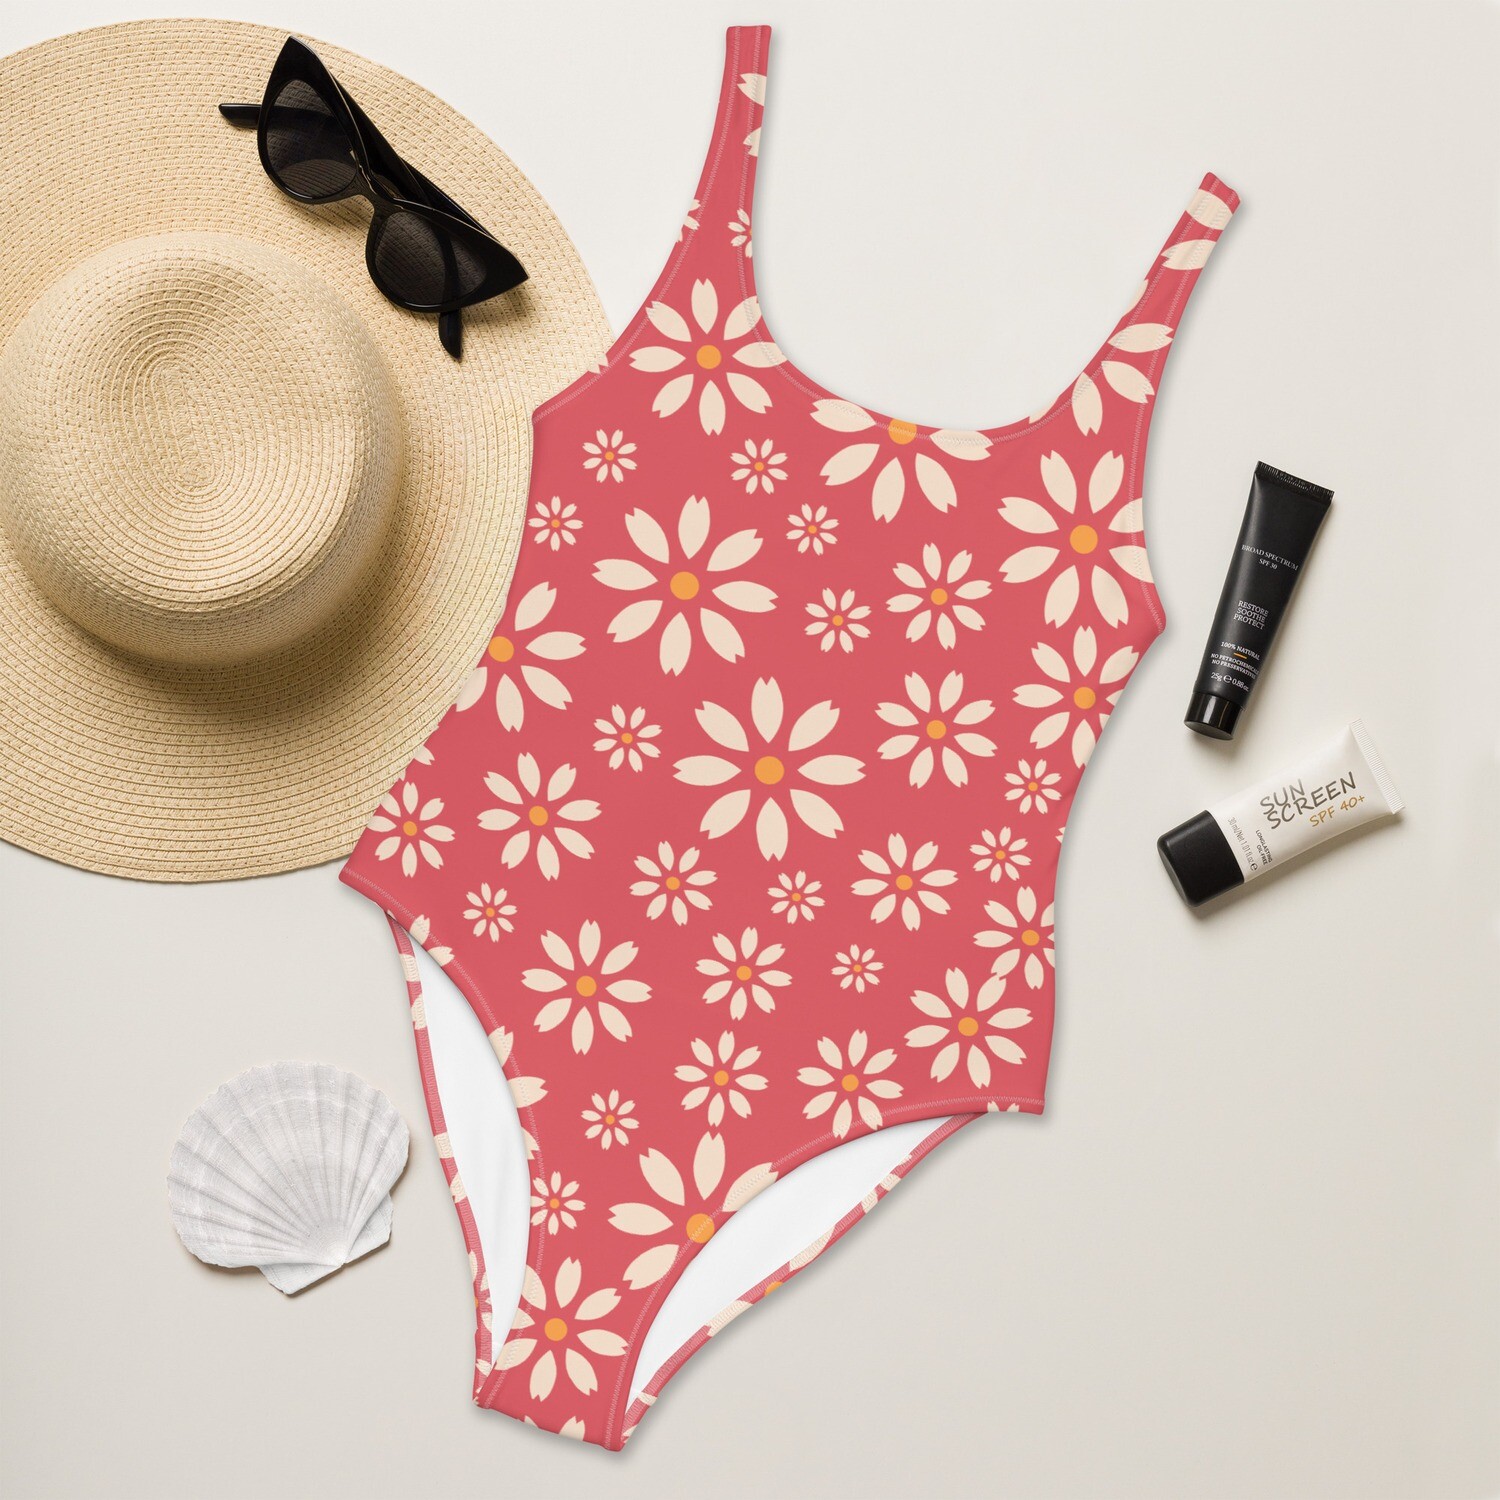 Retro red one-piece swimsuit with bohemian daisy pattern in sizes XS-3XL